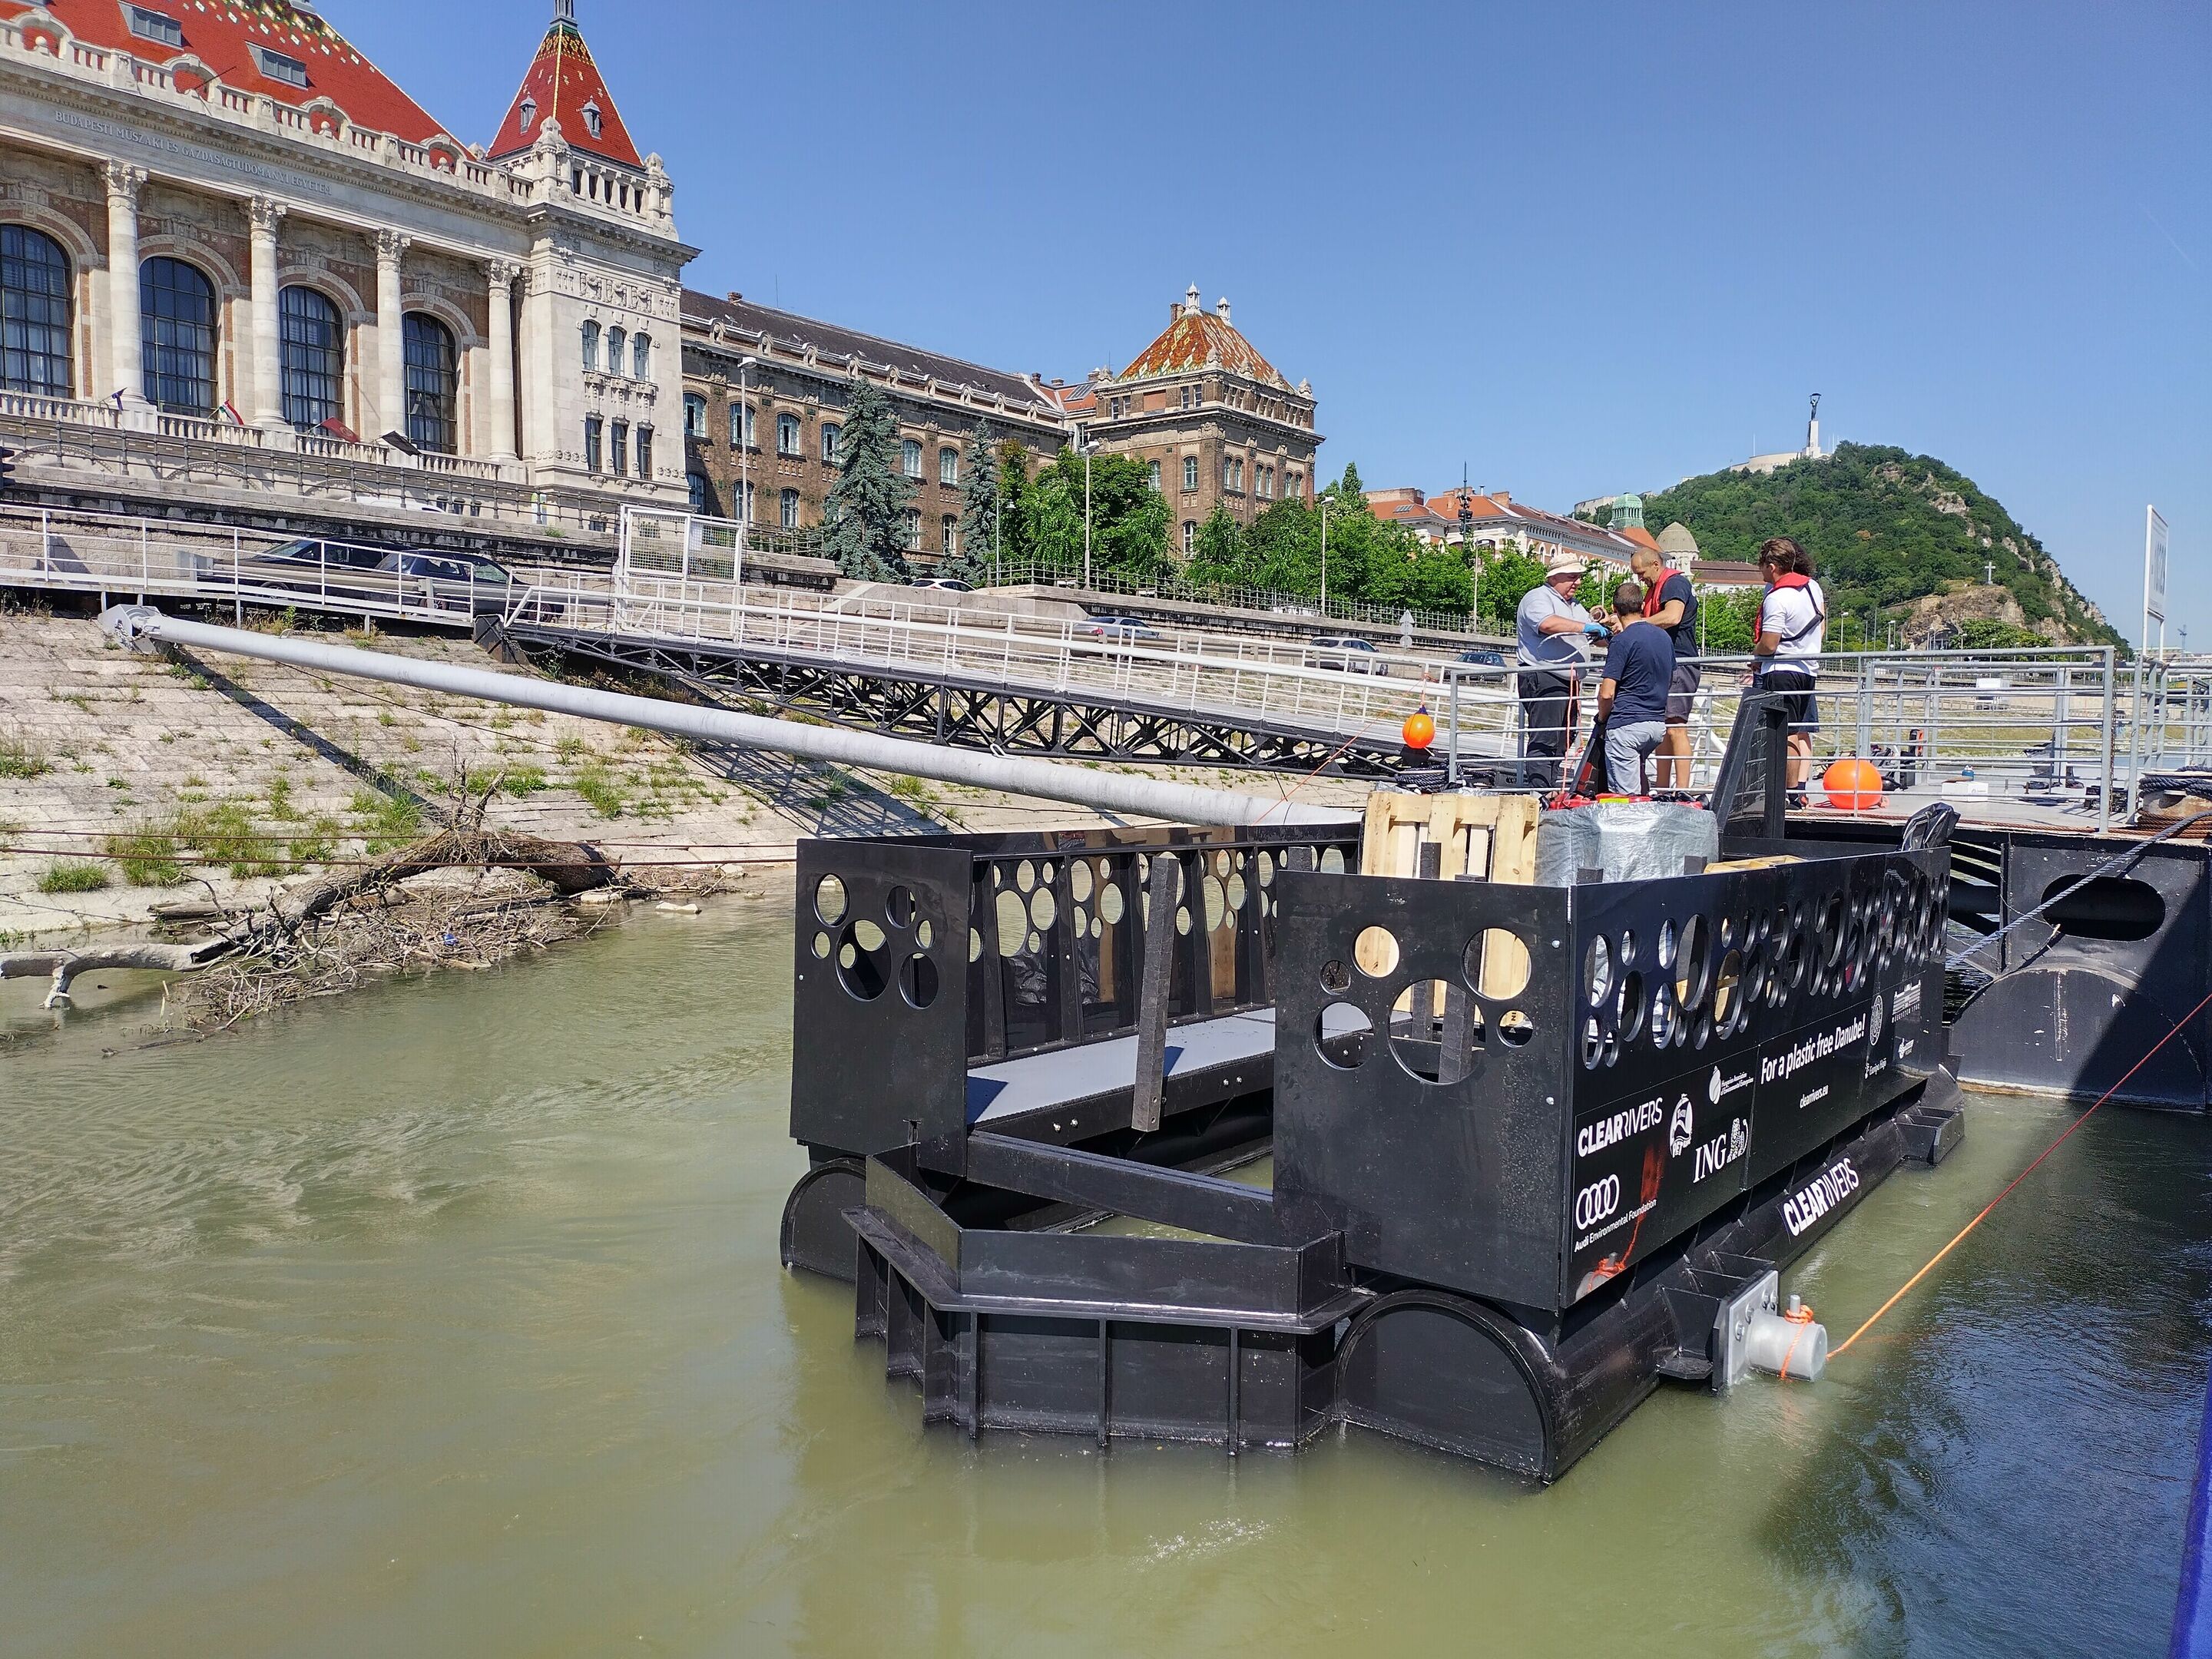 Removing plastic from the Danube: Audi Environmental Foundation supports clean-up project in Budapest